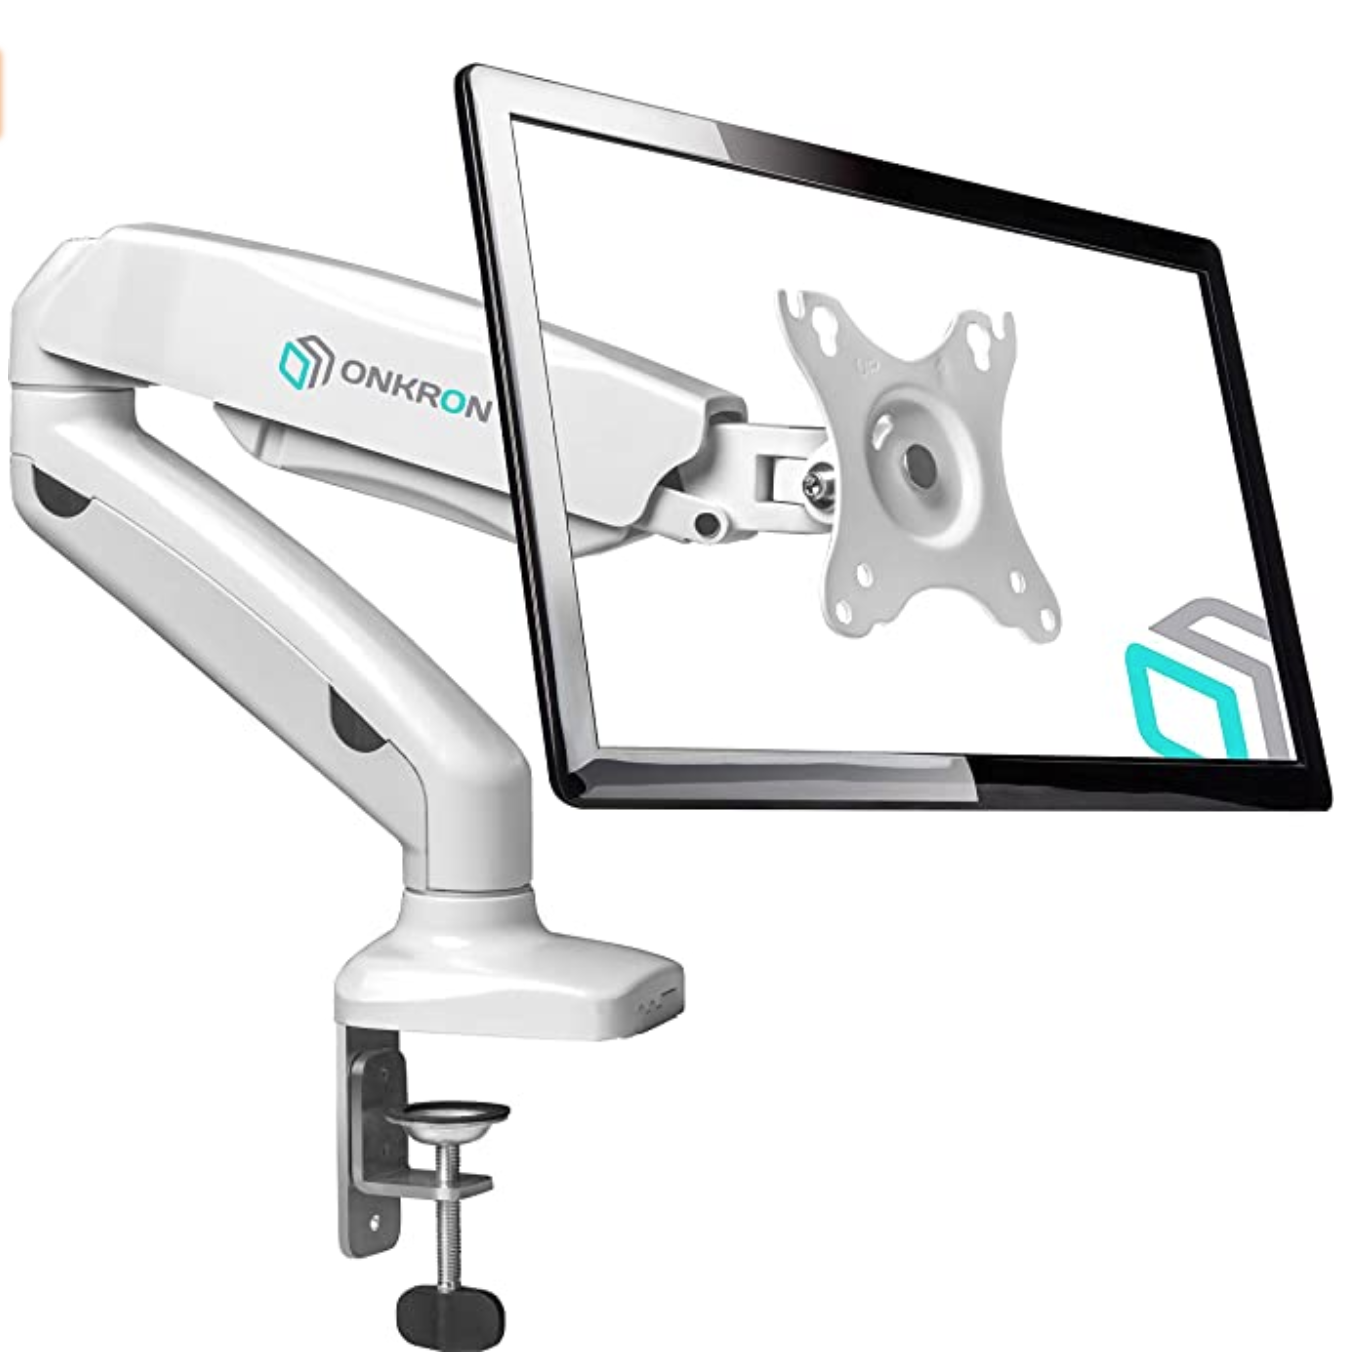 ONKRON Monitor Desk Mount Arm with Bracket For 13 To 27 Inch Computer Screens G80 White 